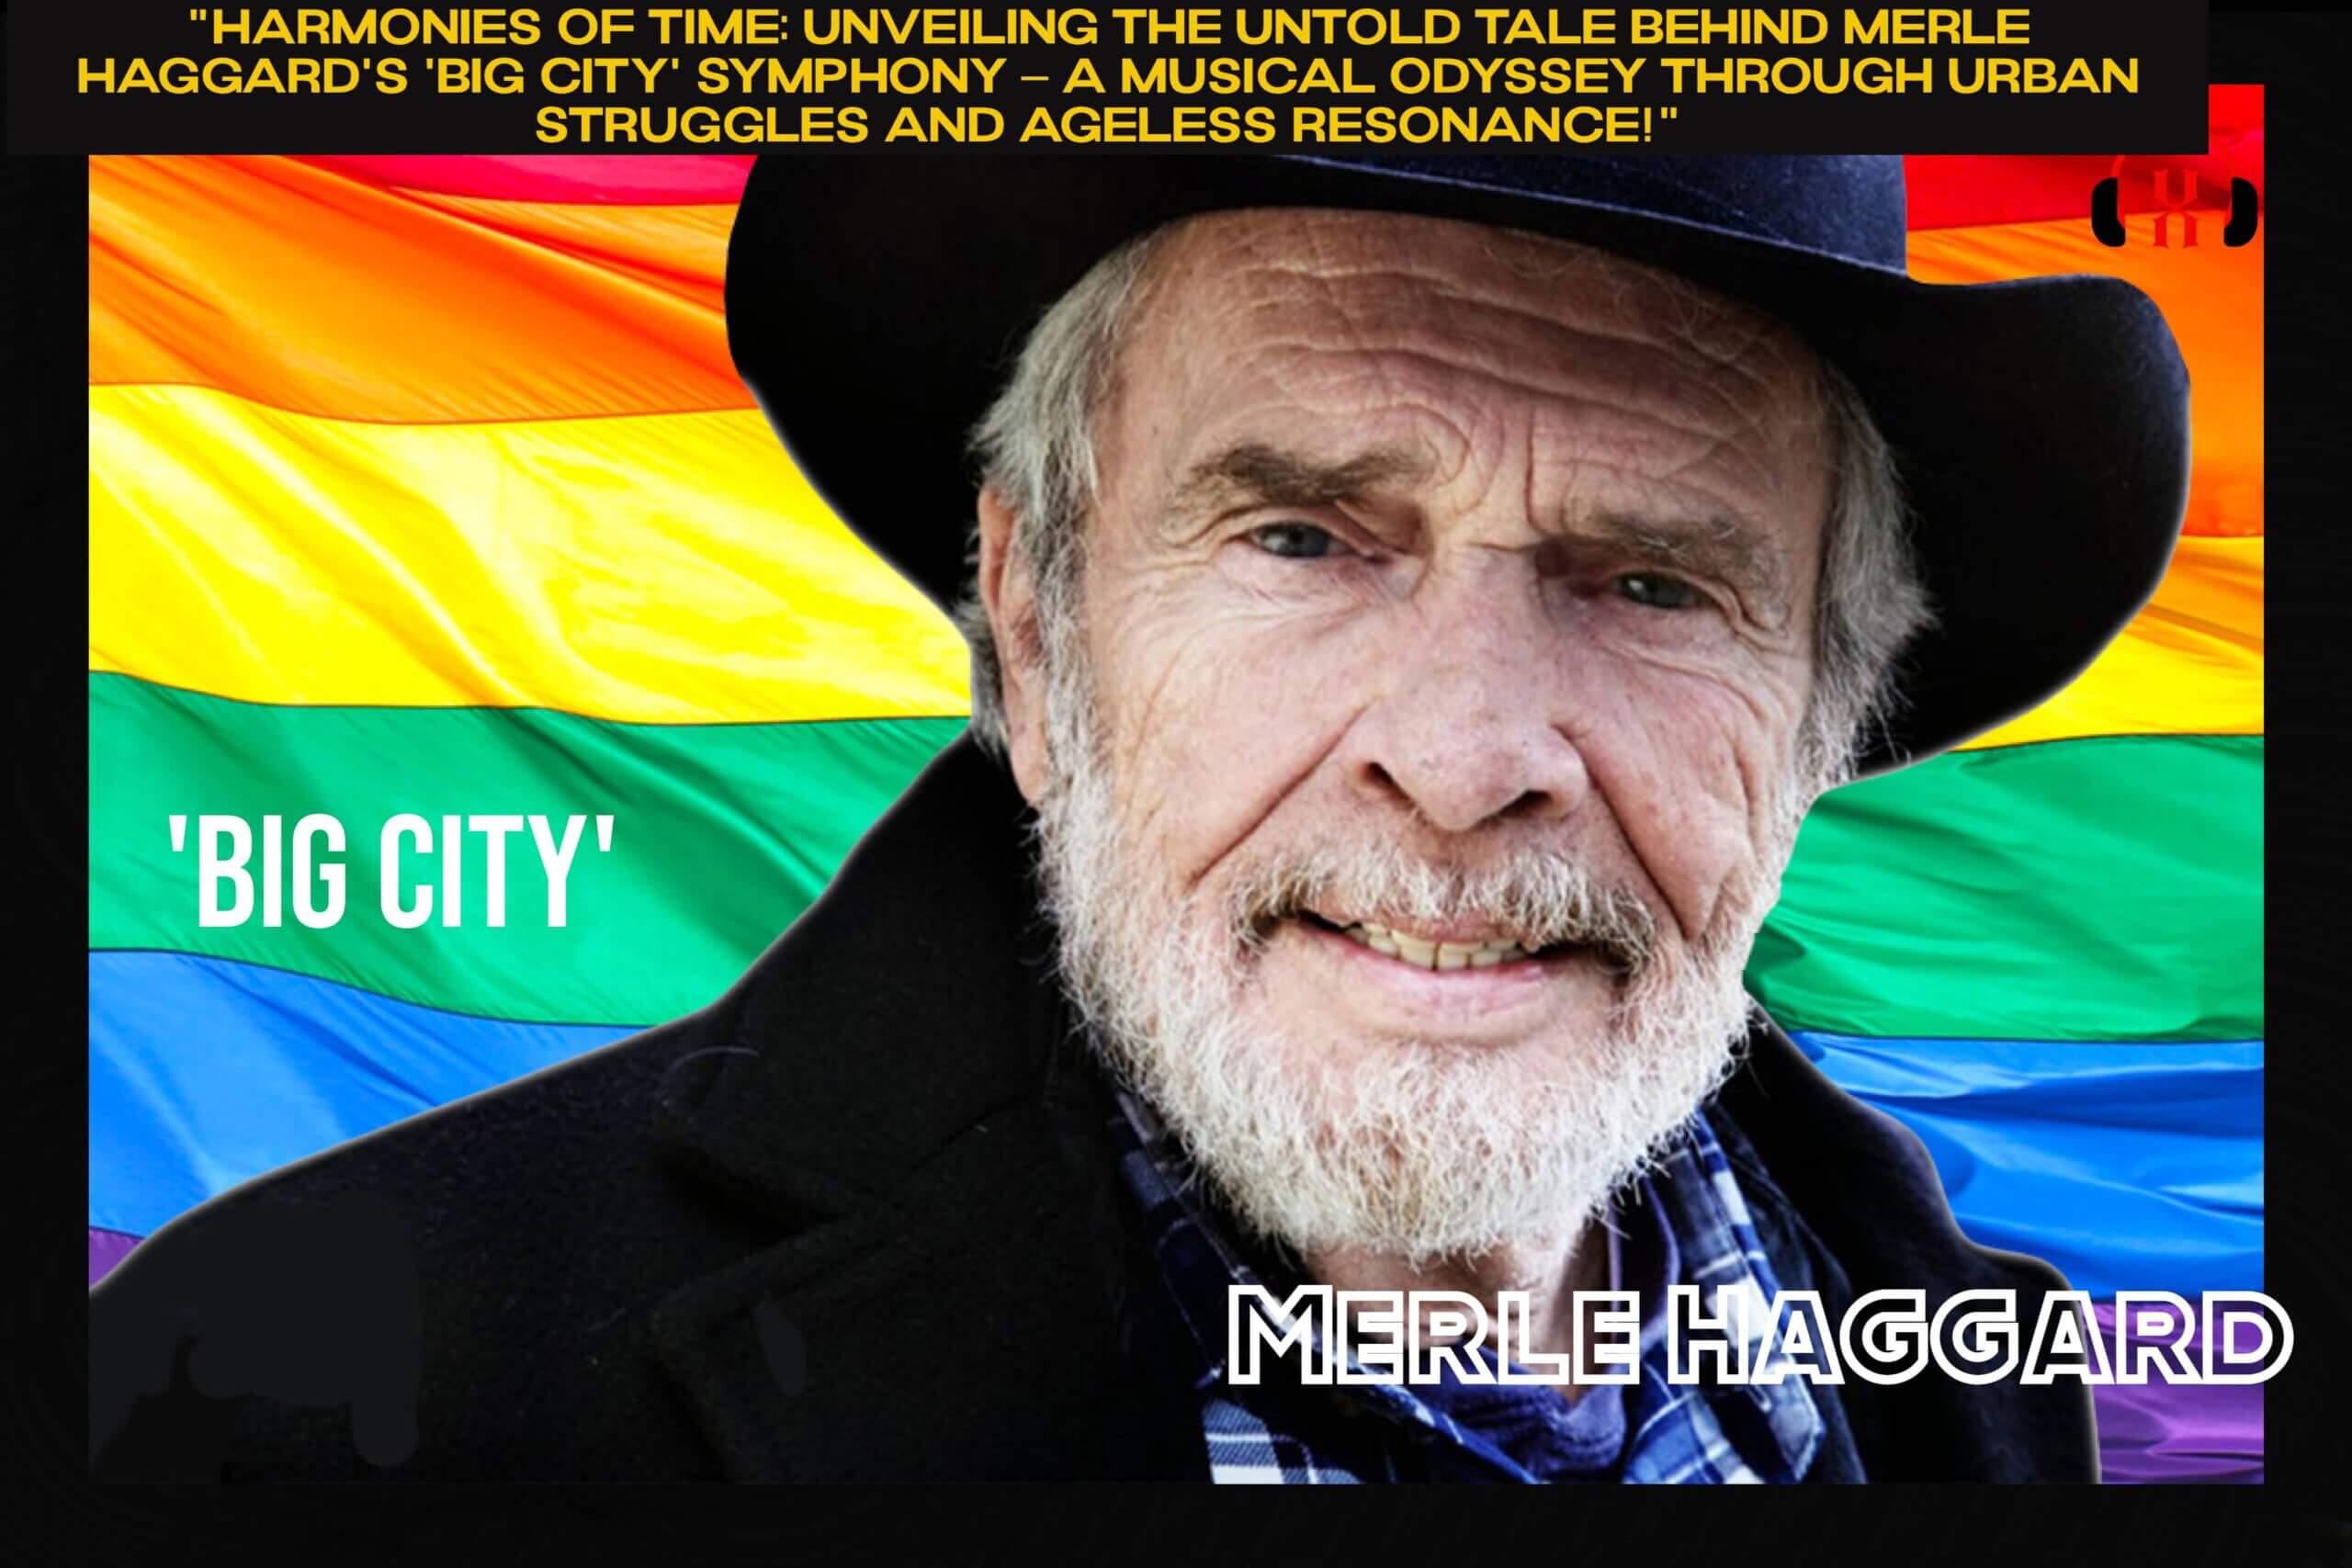 “Harmonies of Time: Unveiling the Untold Tale Behind Merle Haggard’s ‘Big City’ Symphony – A Musical Odyssey Through Urban Struggles and Ageless Resonance!”